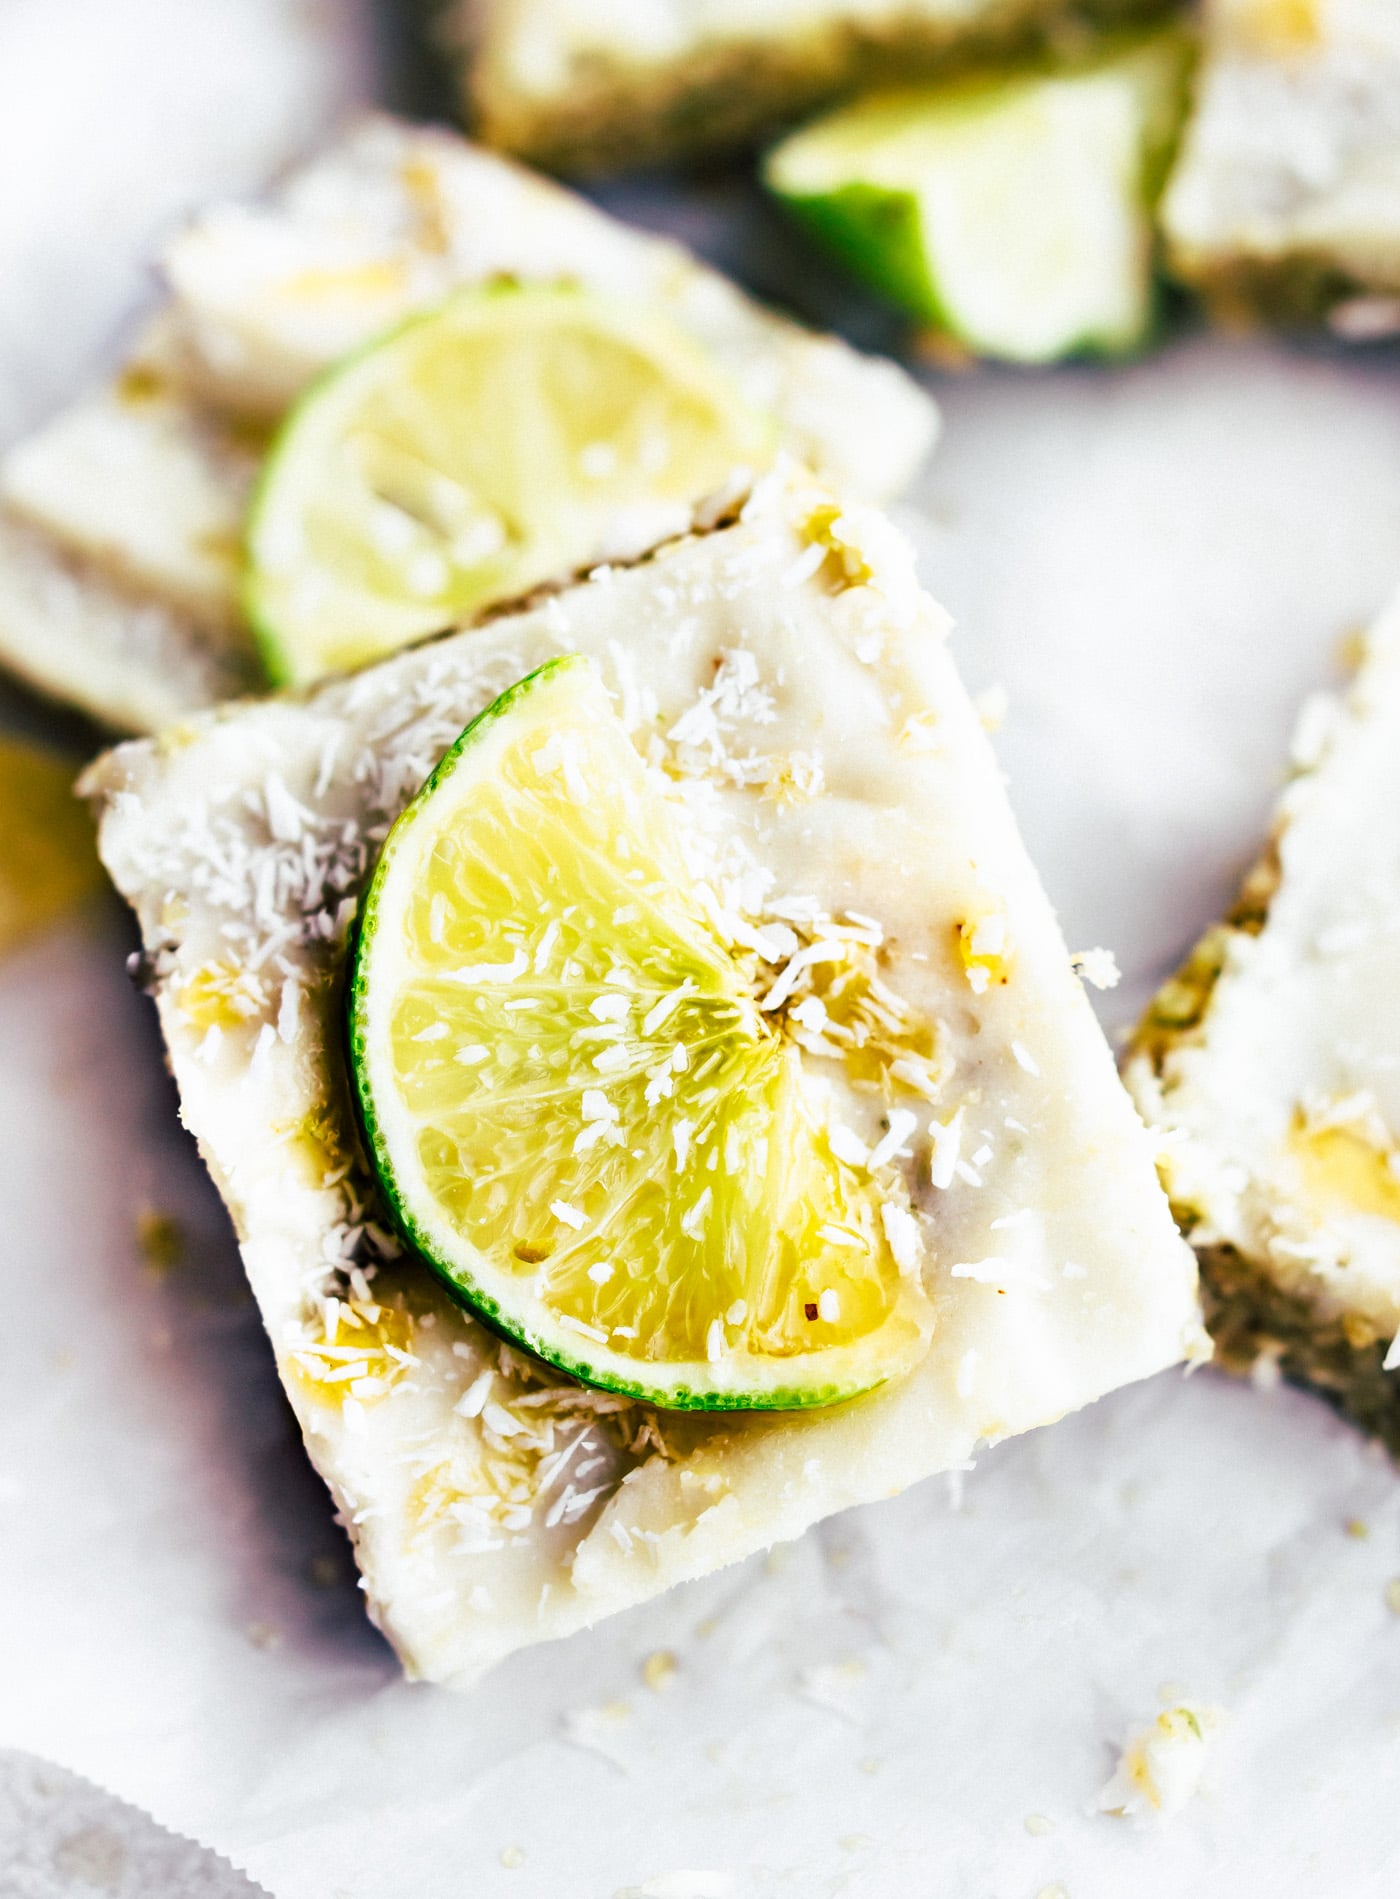 Tropical Cashew No Bake Snack Bars is a vegan, paleo, healthy snack bars recipe, inspired by my love for Hawaiian flavors! With dried pineapple, cashew, coconut, lime, and a coconut glaze, this easy dessert style snack bars recipe has an explosion of tropical flavor!